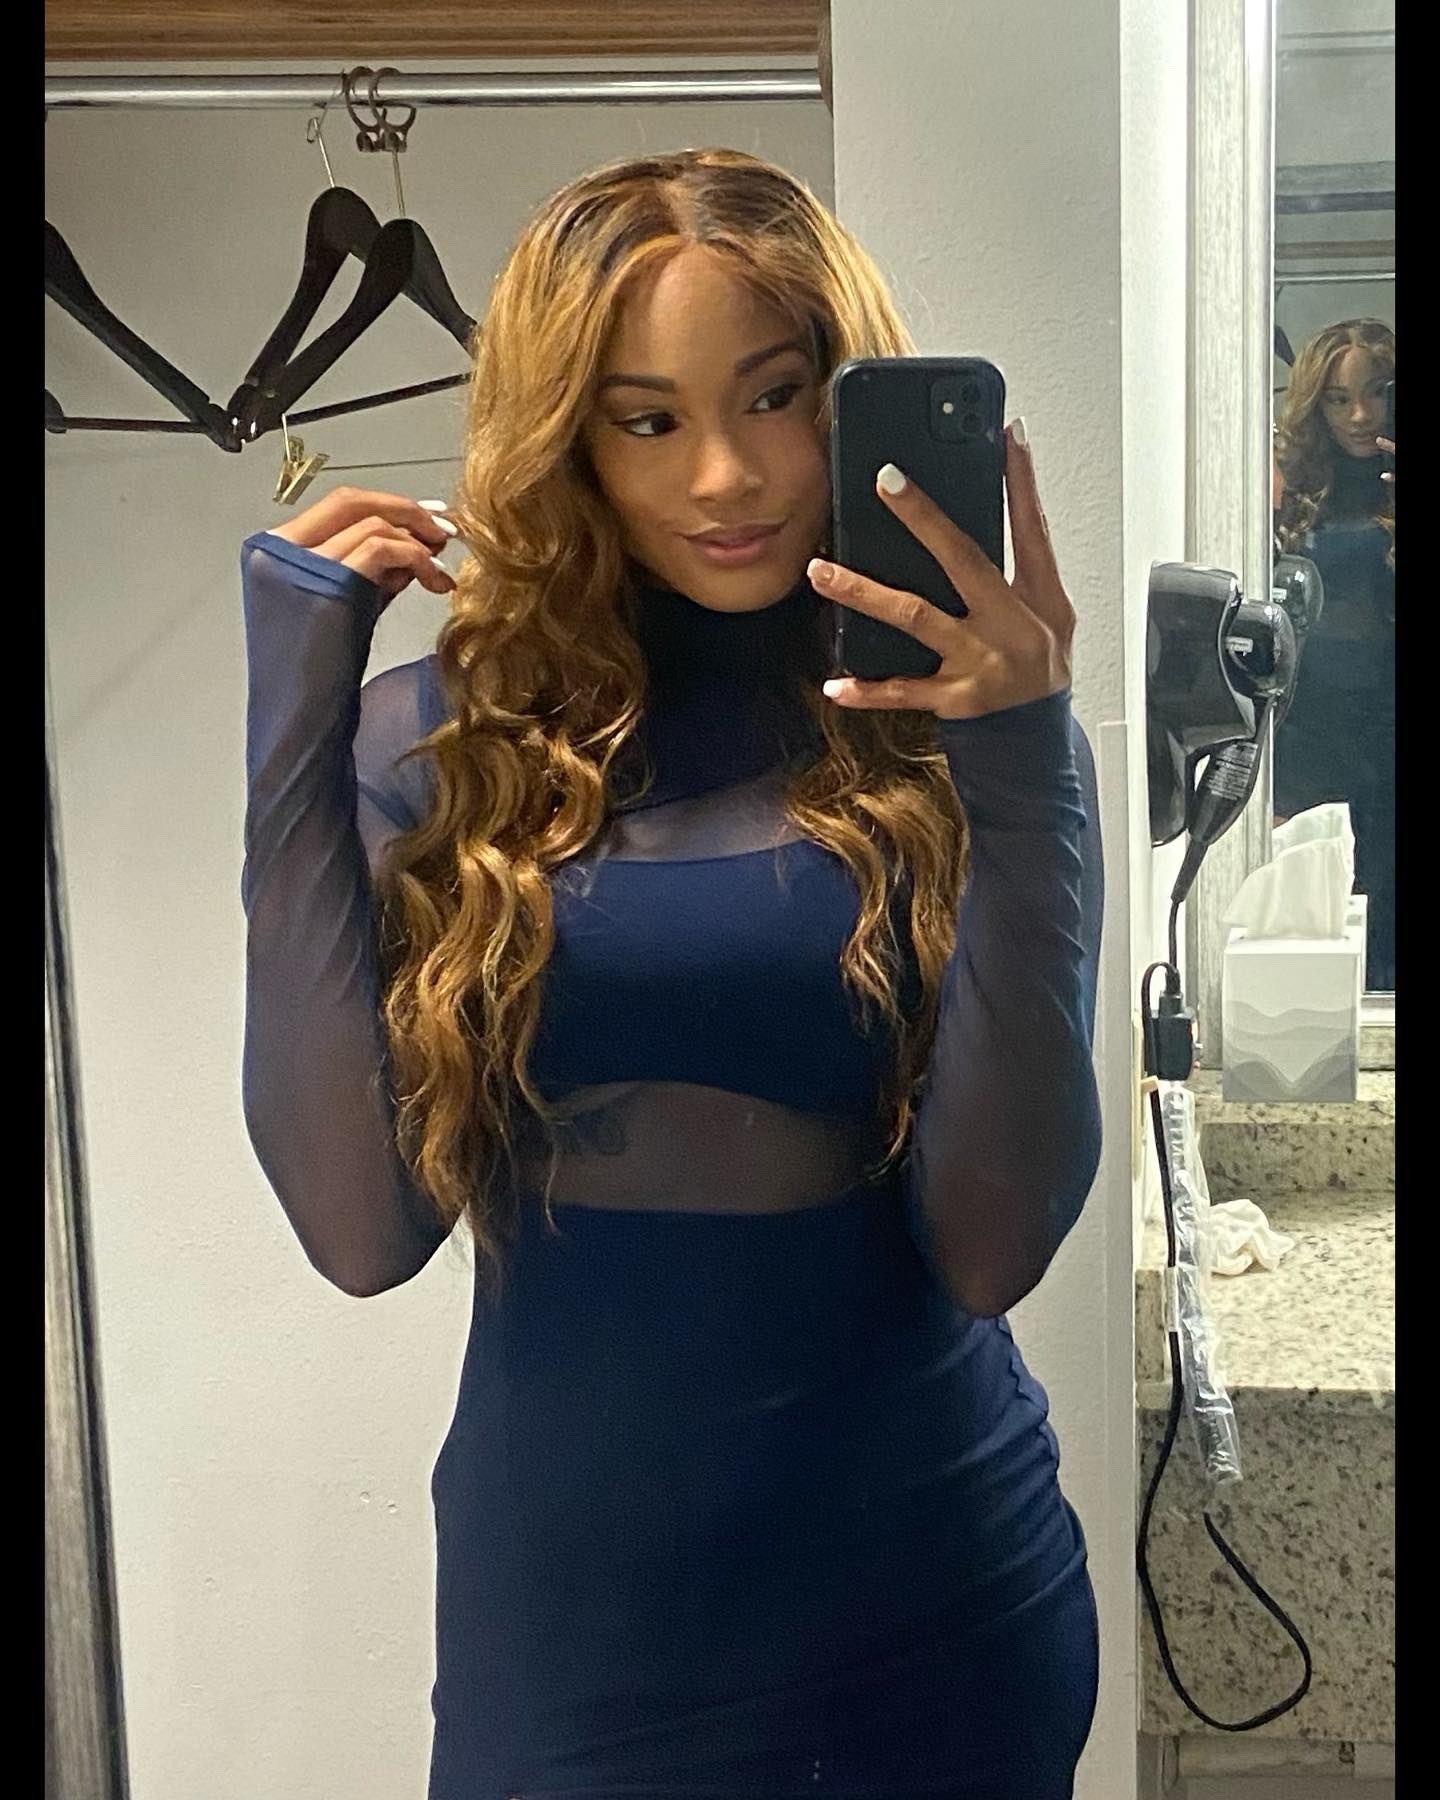 Photo by Ruinedcarpet with the username @Ruinedcarpet, posted on July 28, 2022. The post is about the topic RC's Mirror Selfies and the text says 'Kaci Lennox.

#KaciLennox #Cute #ProWrestler #Hot #BlackGirl #MirrorSelfie #Sexy #Fit #Slim #Cutie #Hottie #Ebony #Selfie #ChangingRoom #FitGirl #DressingRoom #Blonde #BlackWoman #Cuteness #Beauty #WomensWrestling #ProWrestling'